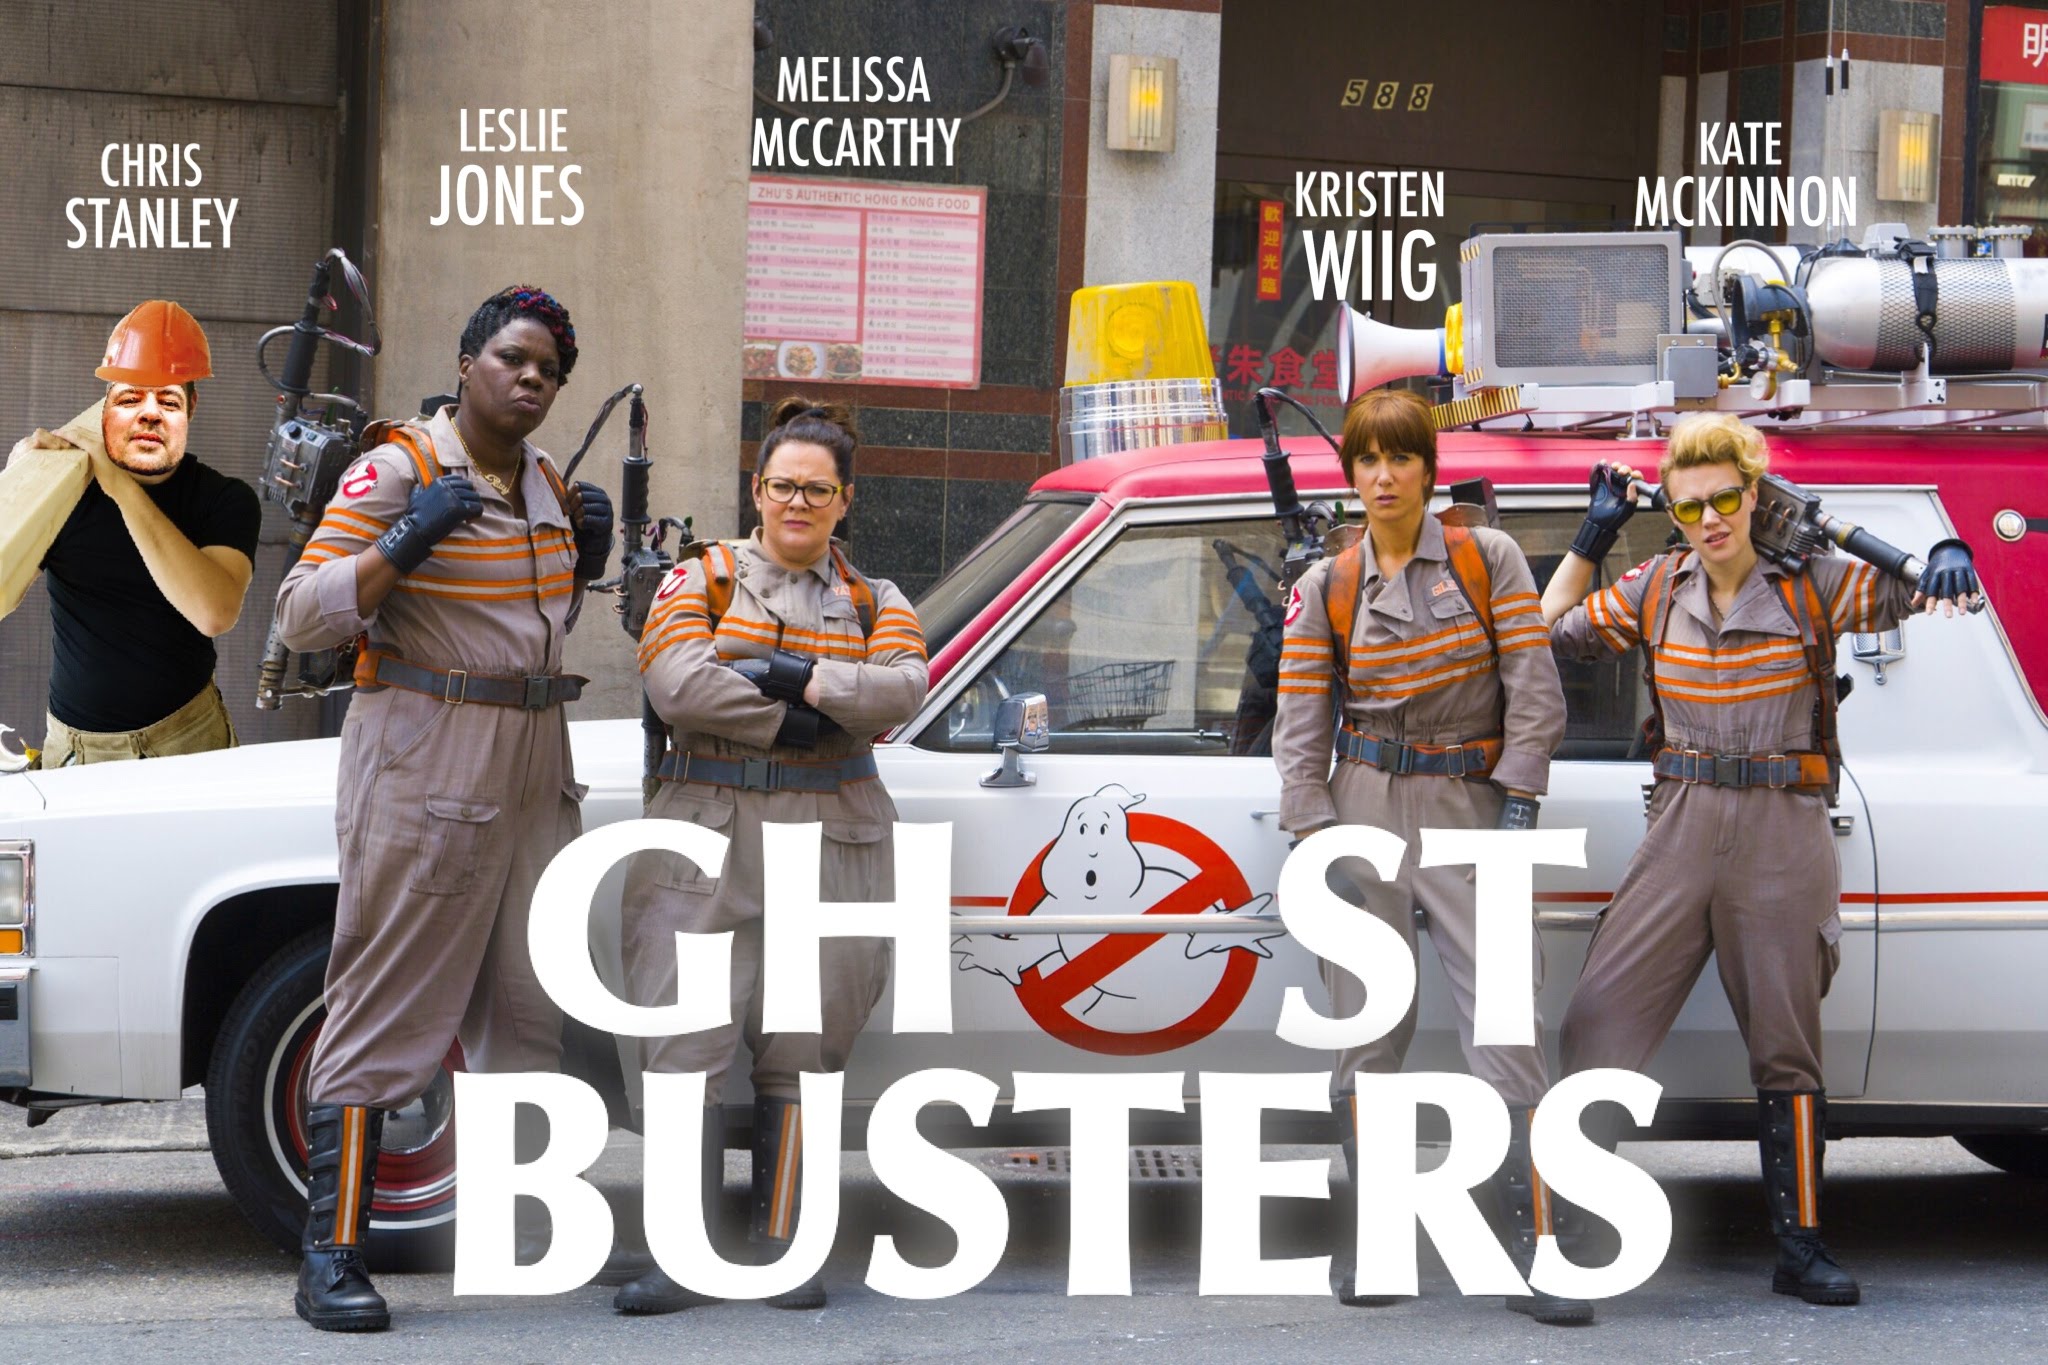 THE NEW GHOSTBUSTERS STARTS WORLD WAR 3!!!